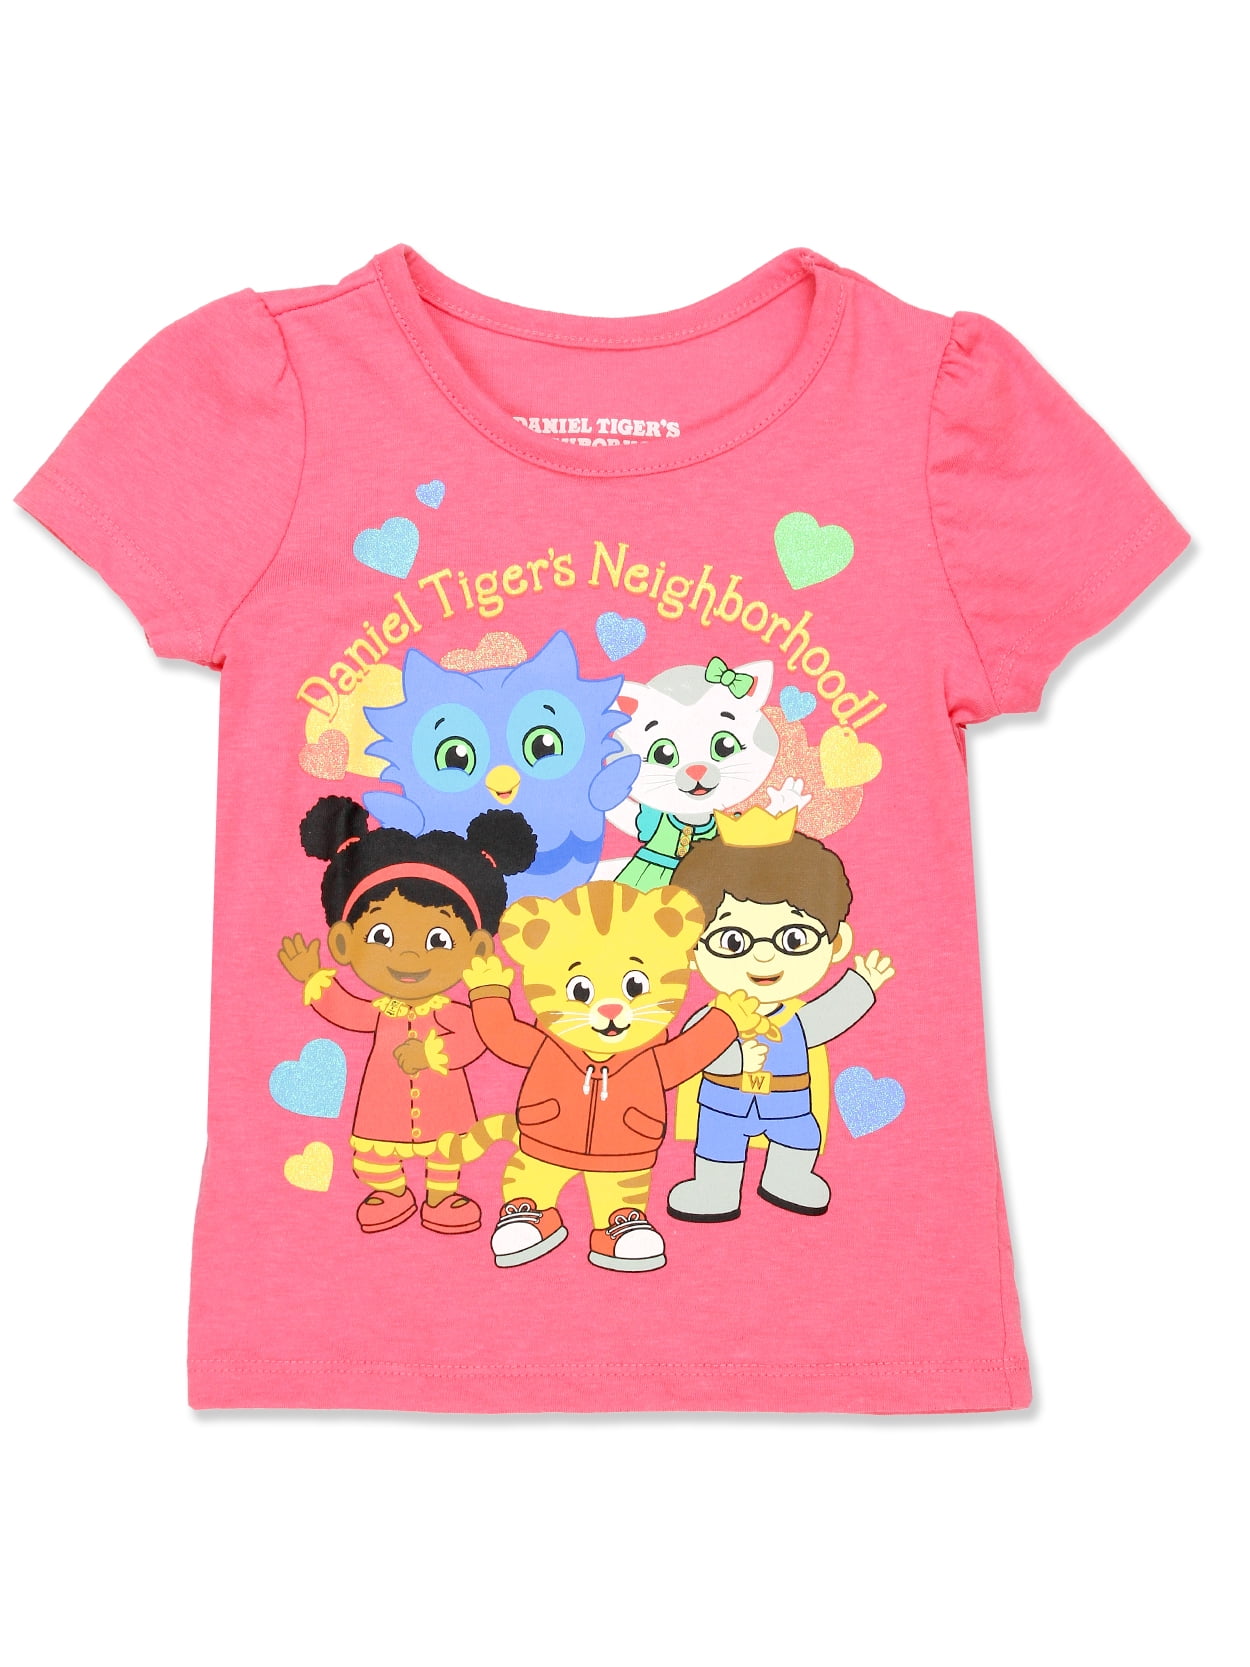 7 Colors Available 4T Big Cat Kids T Shirt 12 Boys  Girls Top 8 Gift Friendly Tiger Tee Tshirt 6 Sizes 2T Tiger Shirt 10